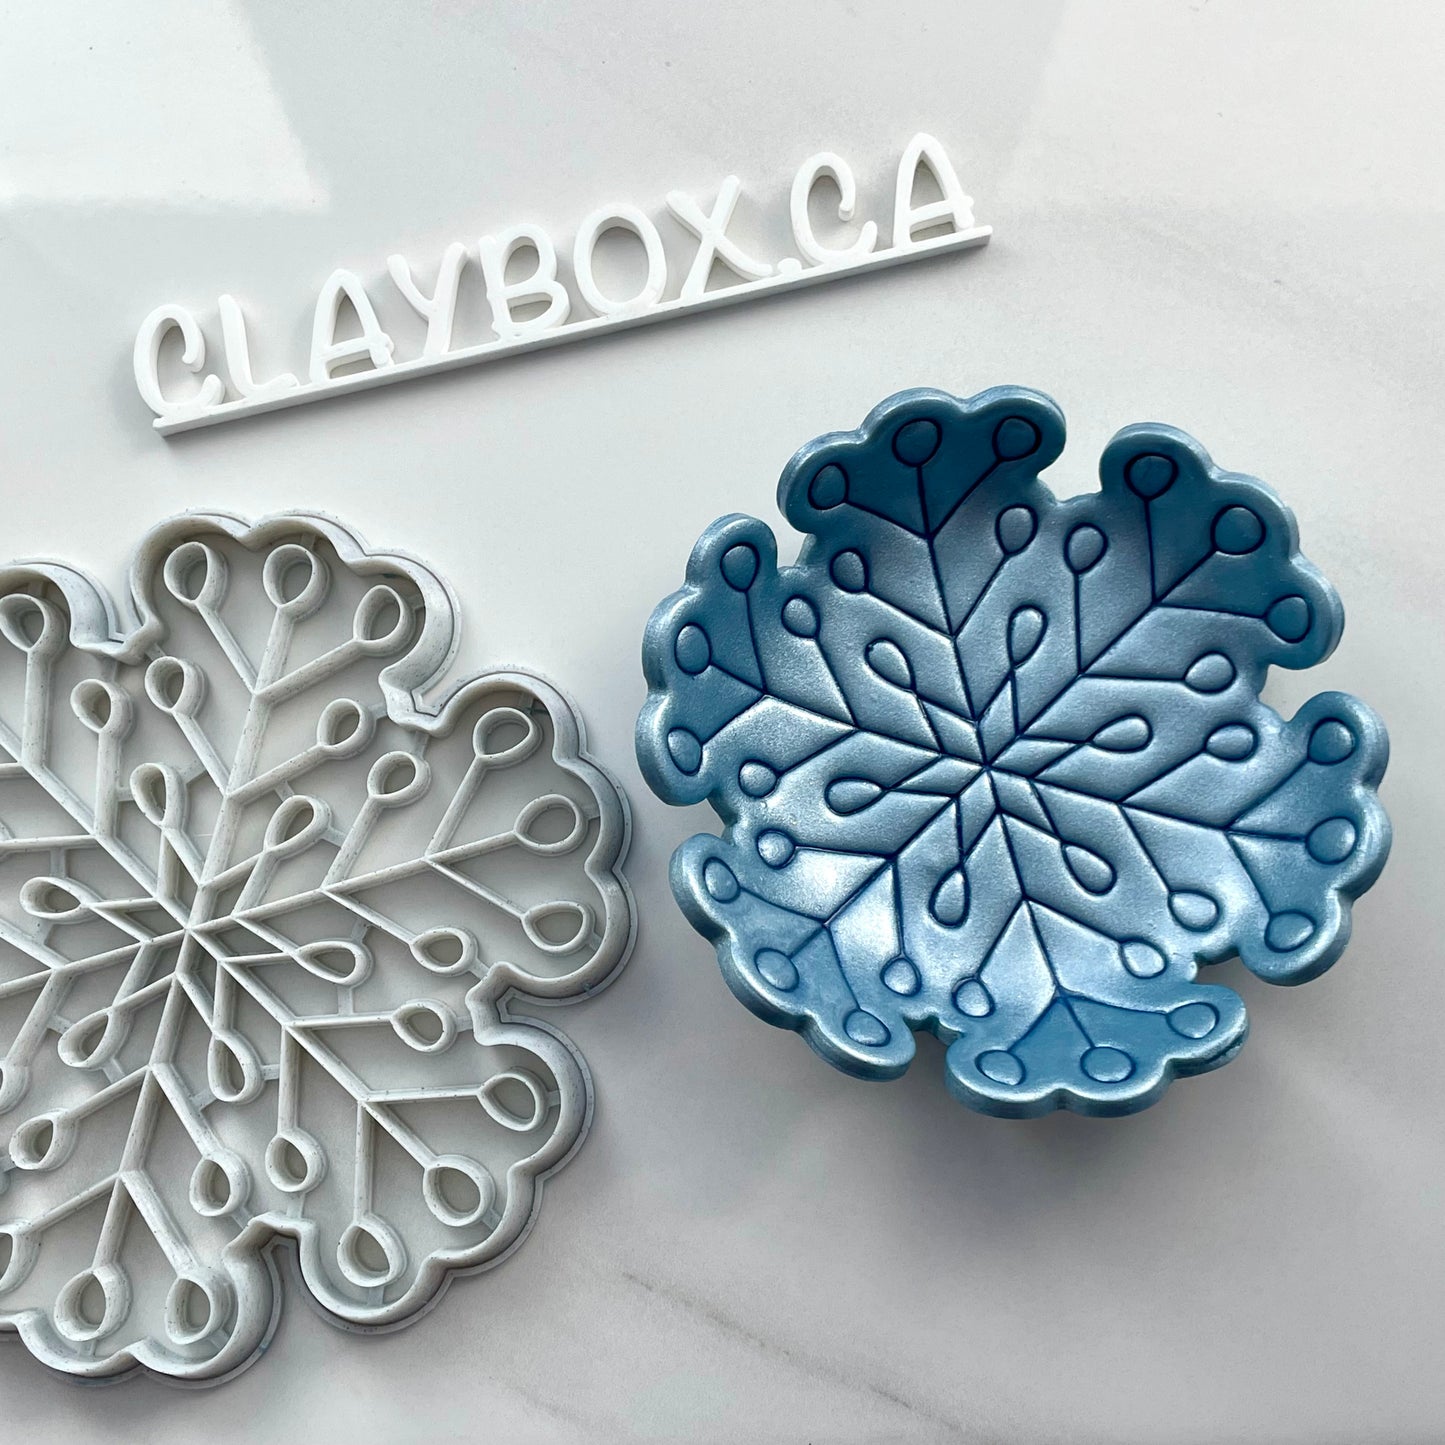 Snowflake large cutter - perfect for making ring dishes or coasters